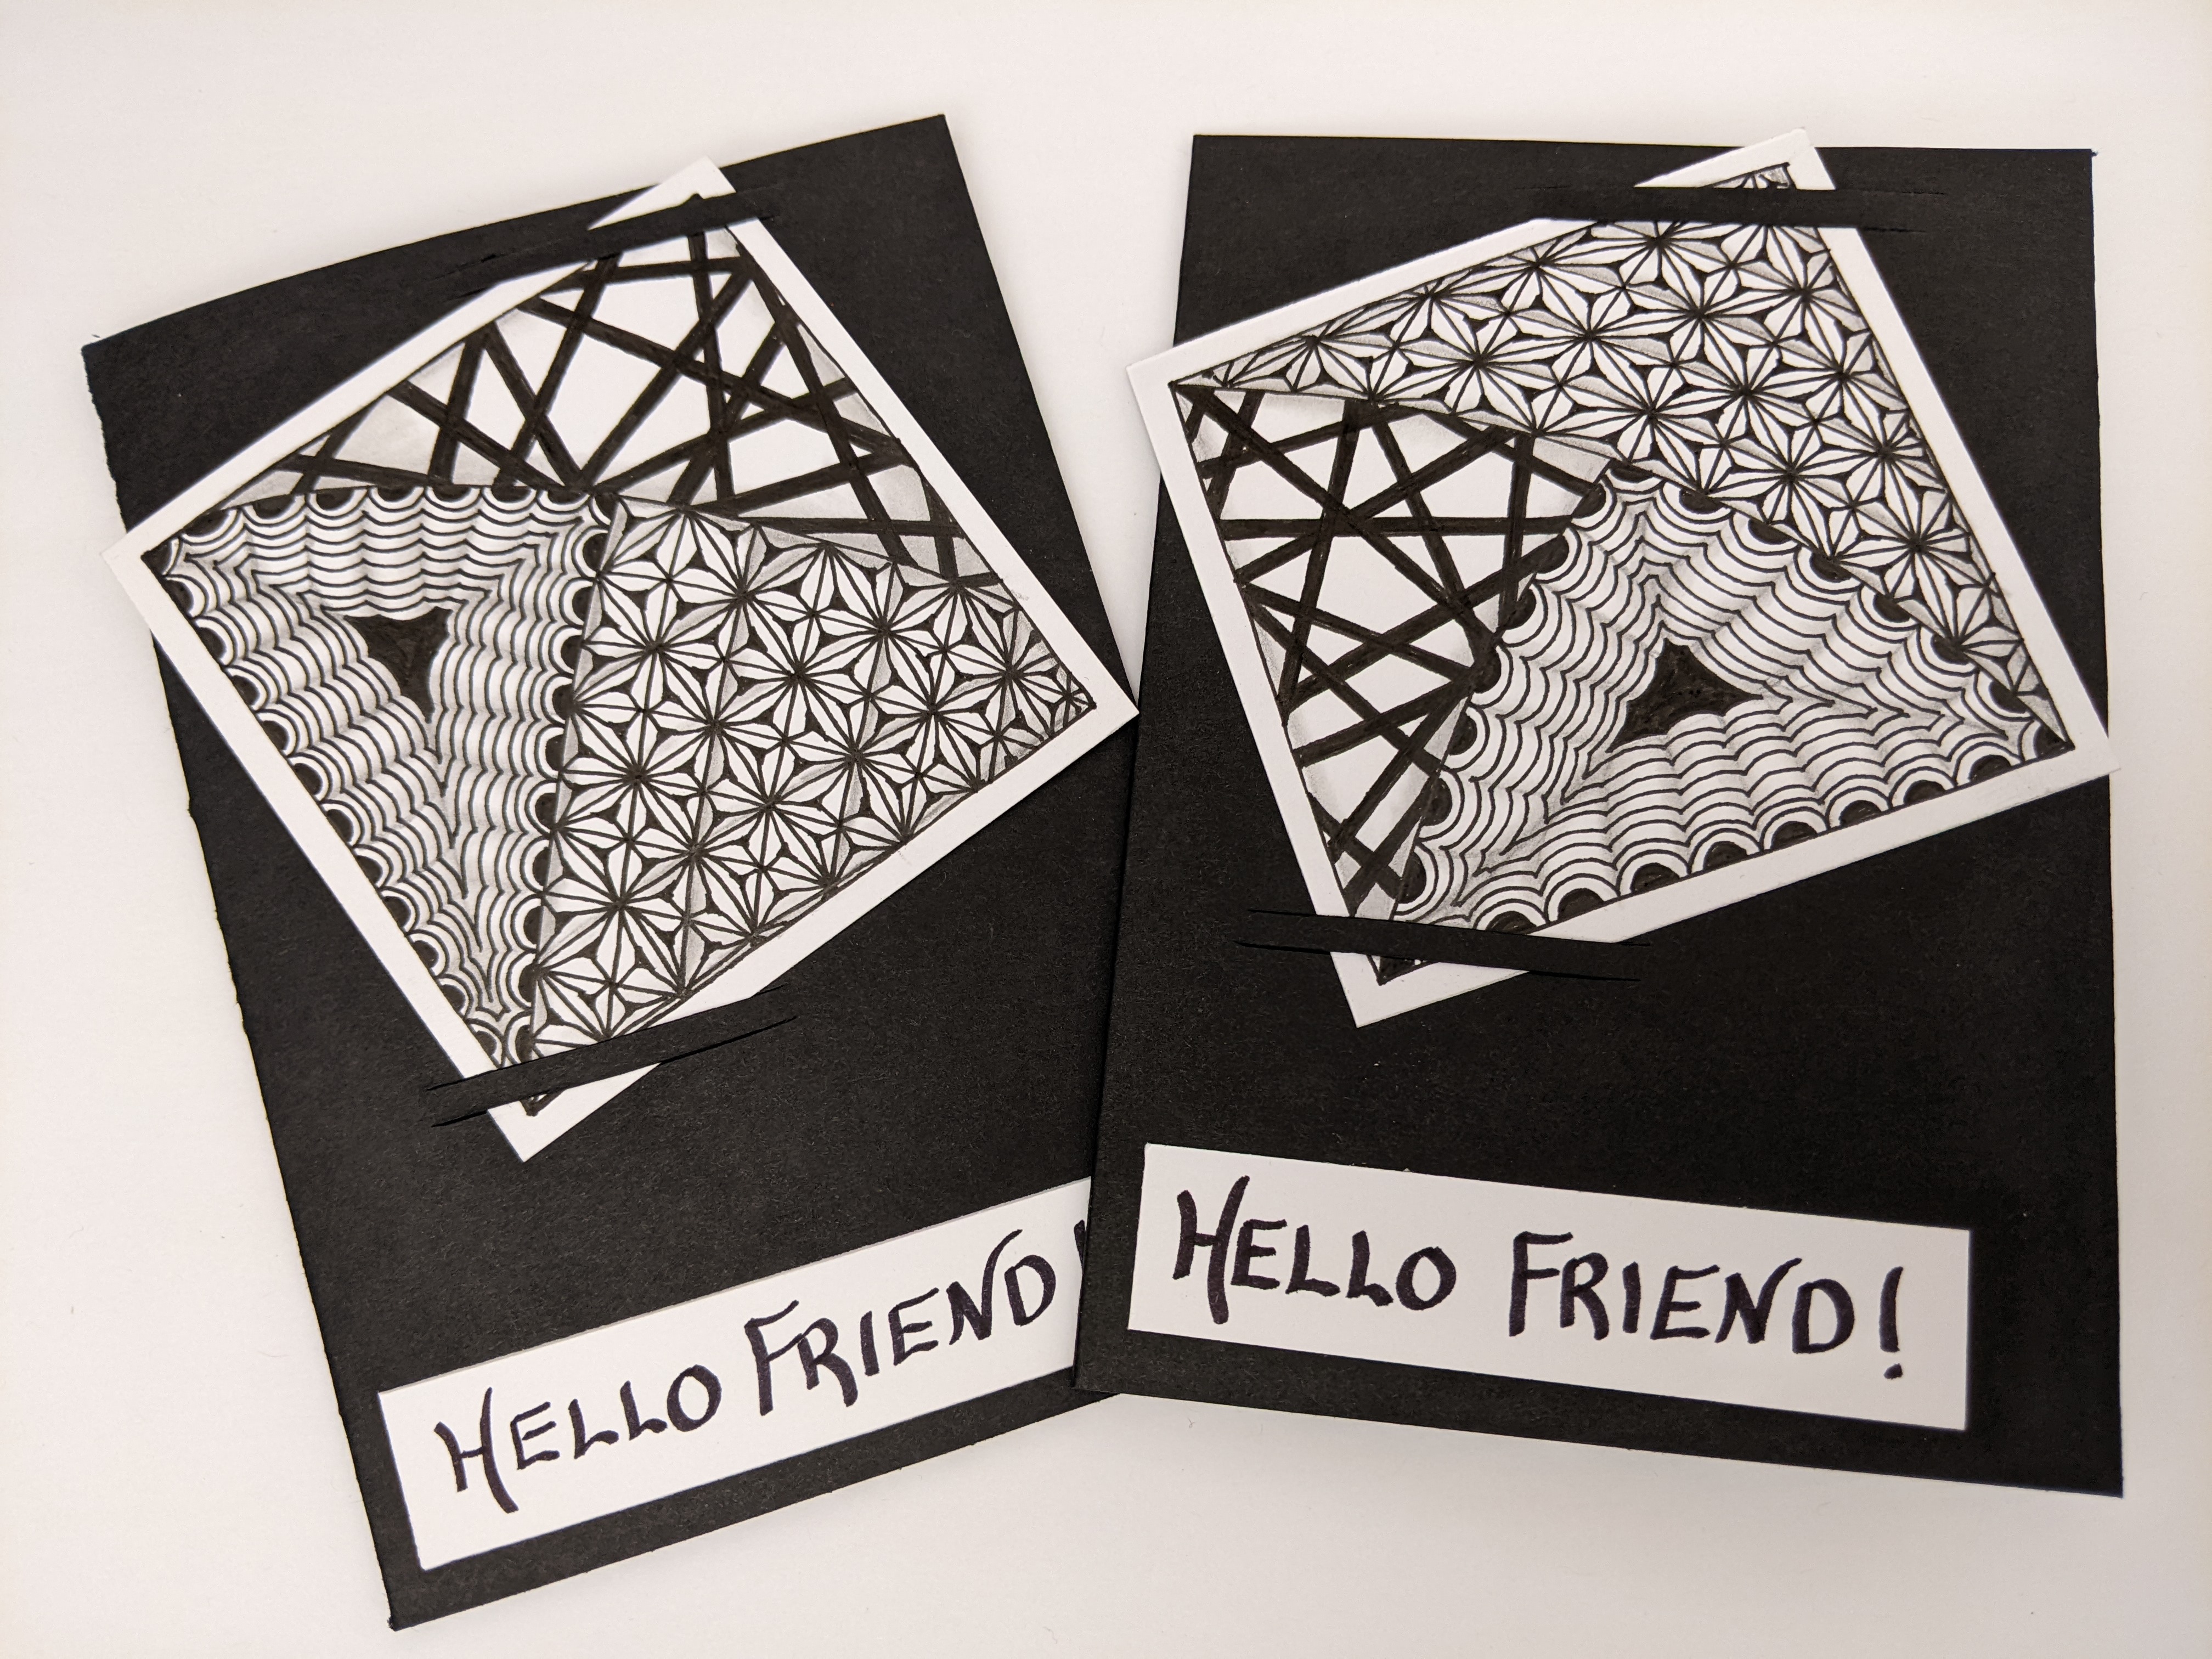 Two black and white cards made using the Zentangle method.